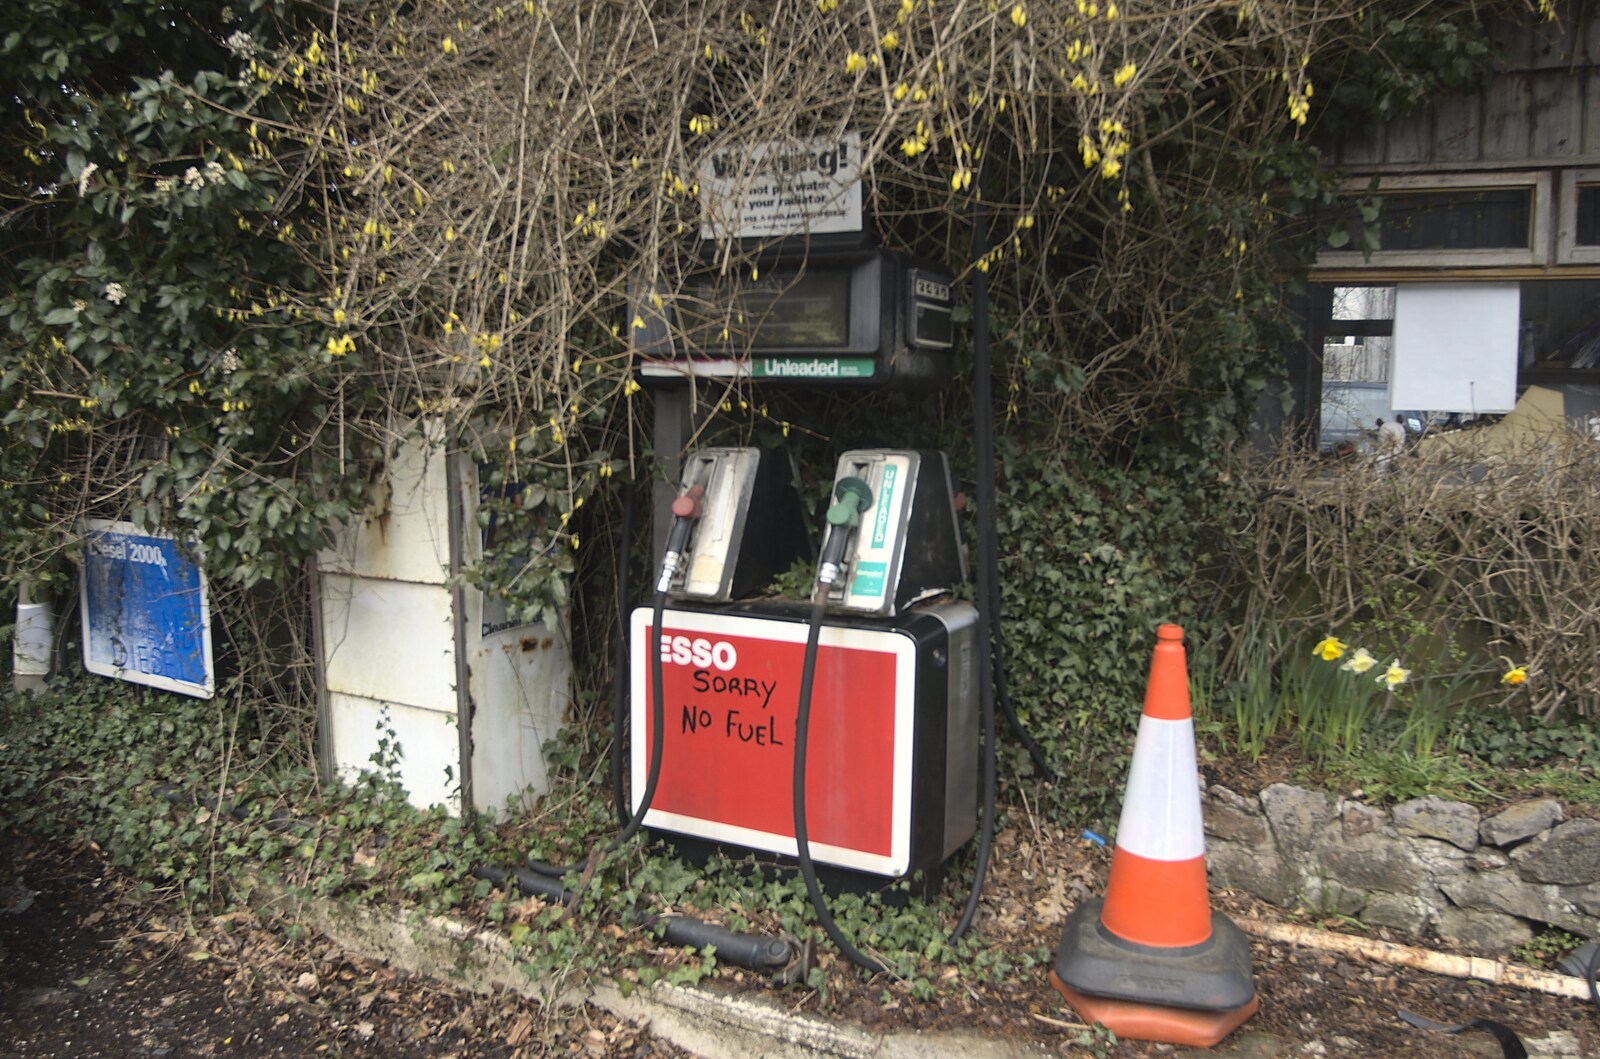 Derelict and overgrown petrol pumps from Easter in Chagford and Hoo Meavy, Devon - 3rd April 2010